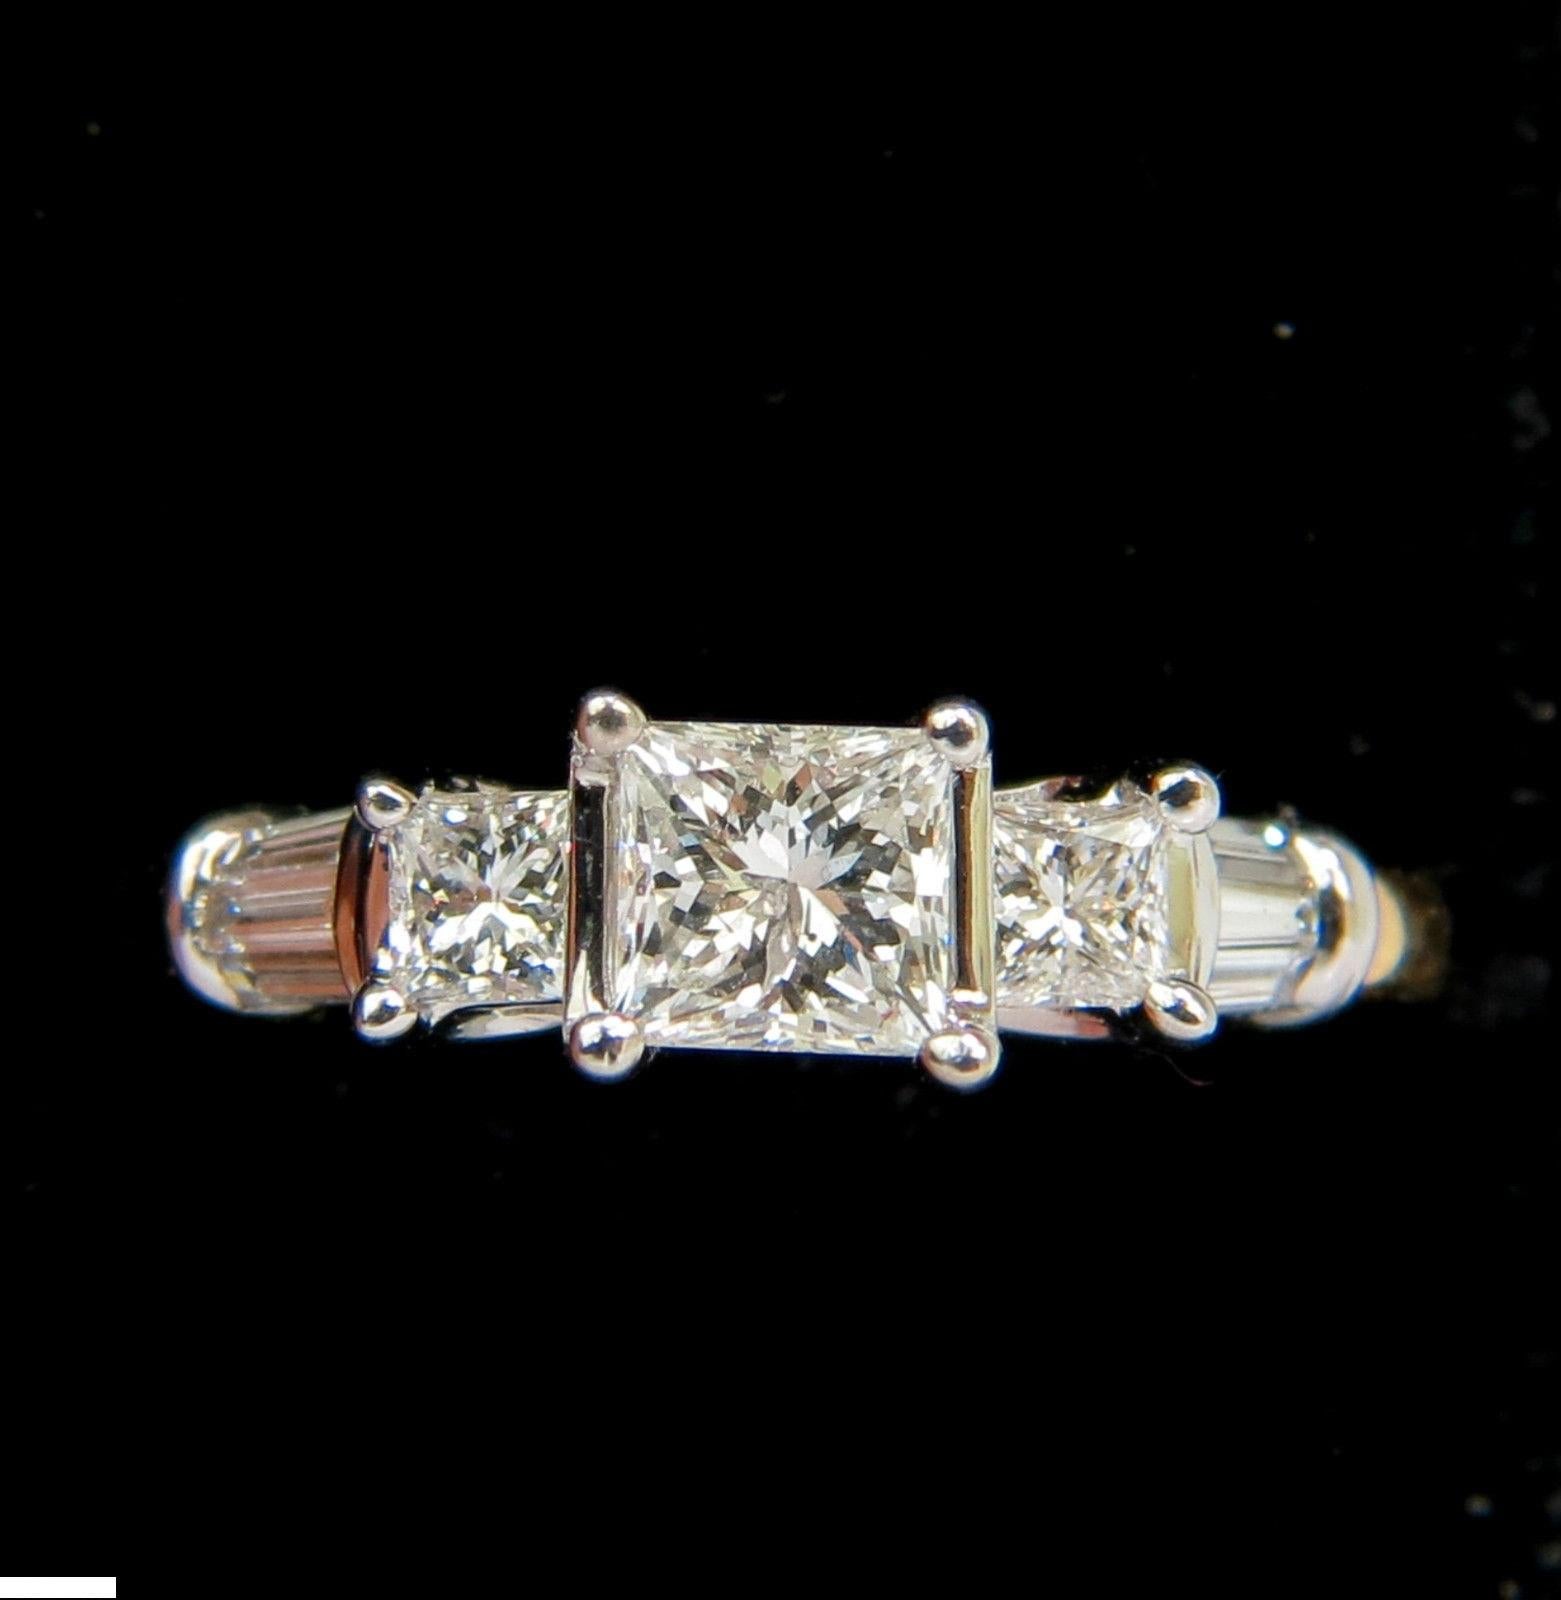 .65ct. Natural diamond ring.

Princess cut, Brilliant & full cut.

Durable mounted

I-color, Si-2 clarity.

Side diamonds:

.65ct. H-color, Si-1 clarity.

18kt. yellow / white gold. 

4.5 grams 

$5000 Appraisal to accompany 

Current size: 7.25 and